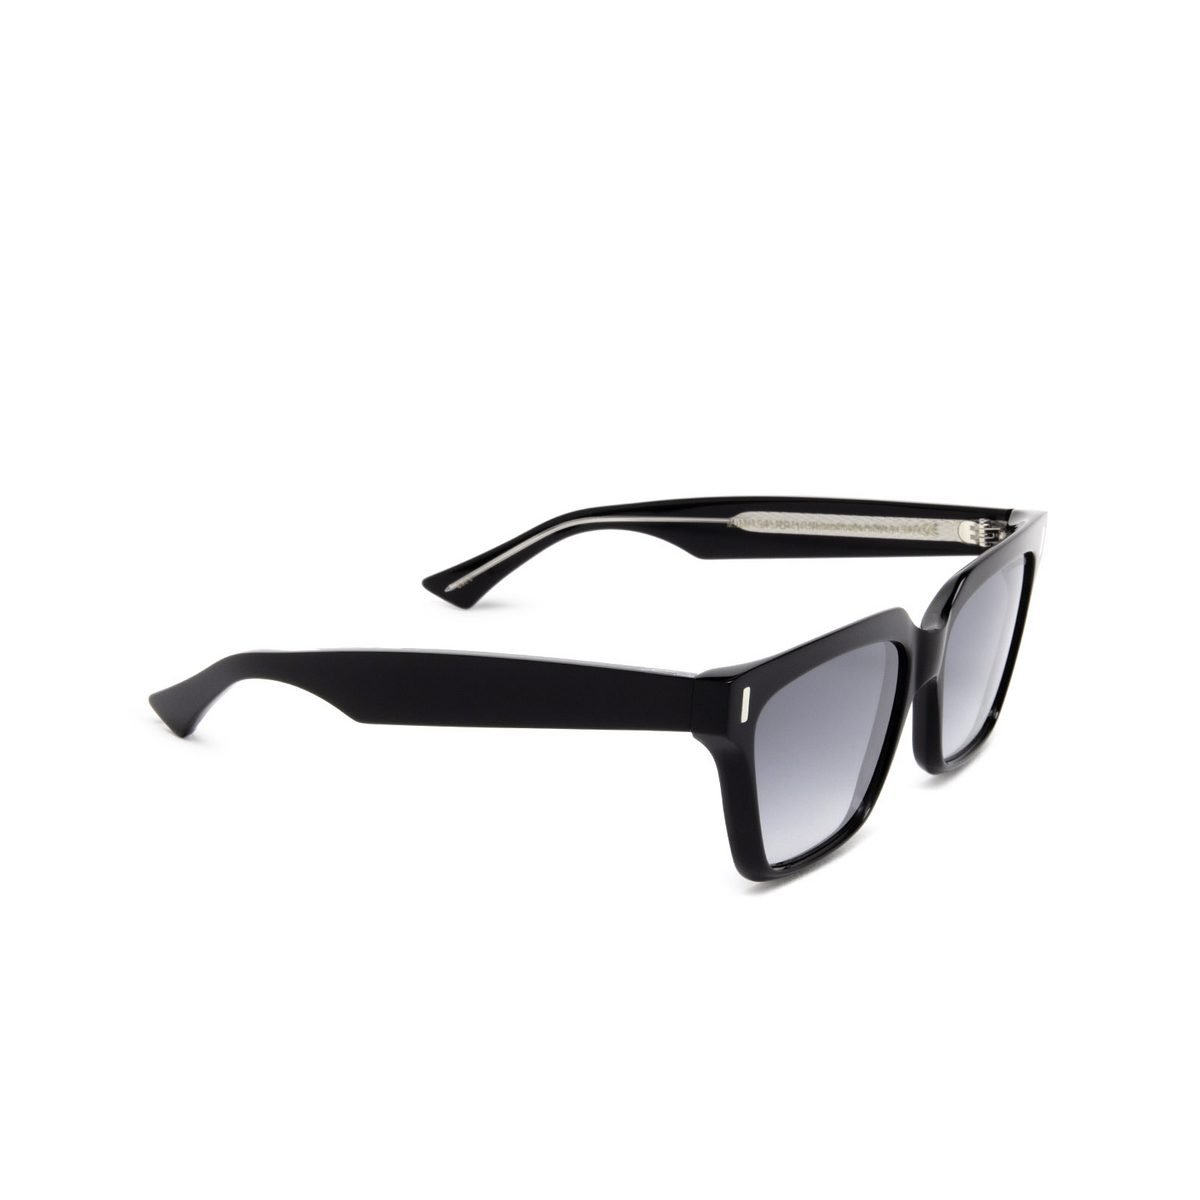 Cutler and Gross® Square Sunglasses: 1347 SUN color Black Taxi 01 - three-quarters view.